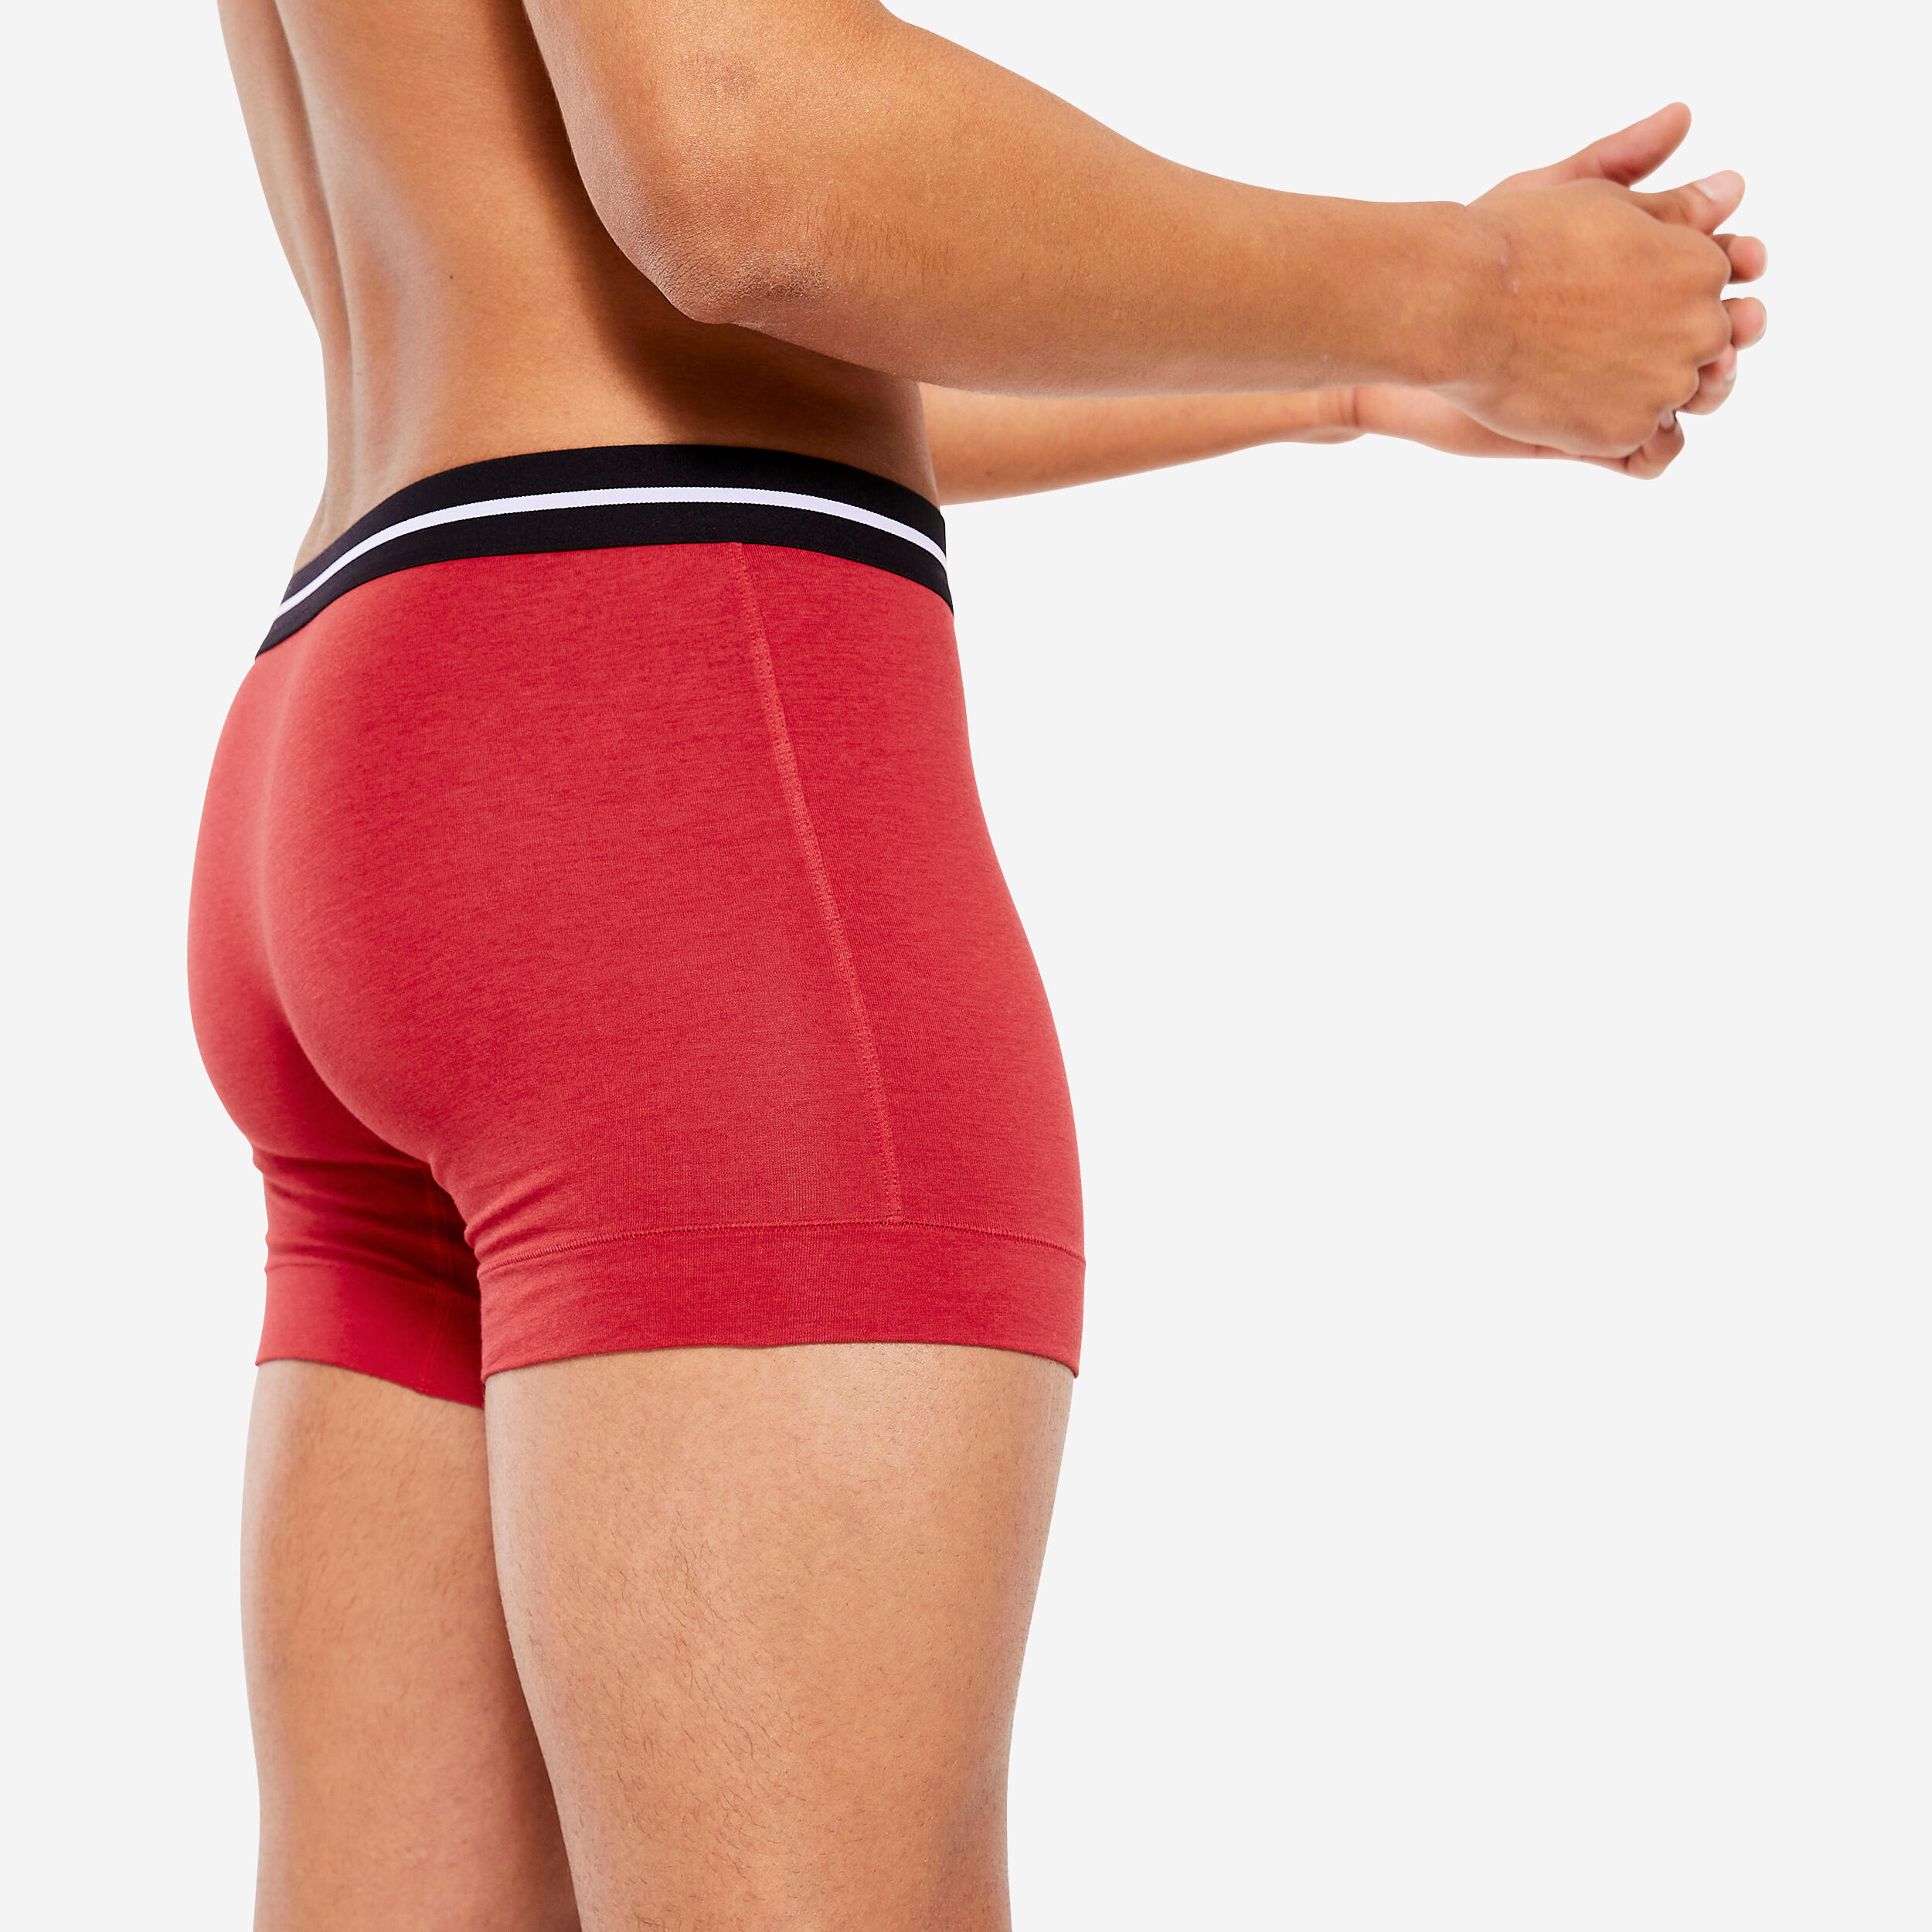 Men's Cotton Boxers Twin-Pack - Grey/Red 8/9